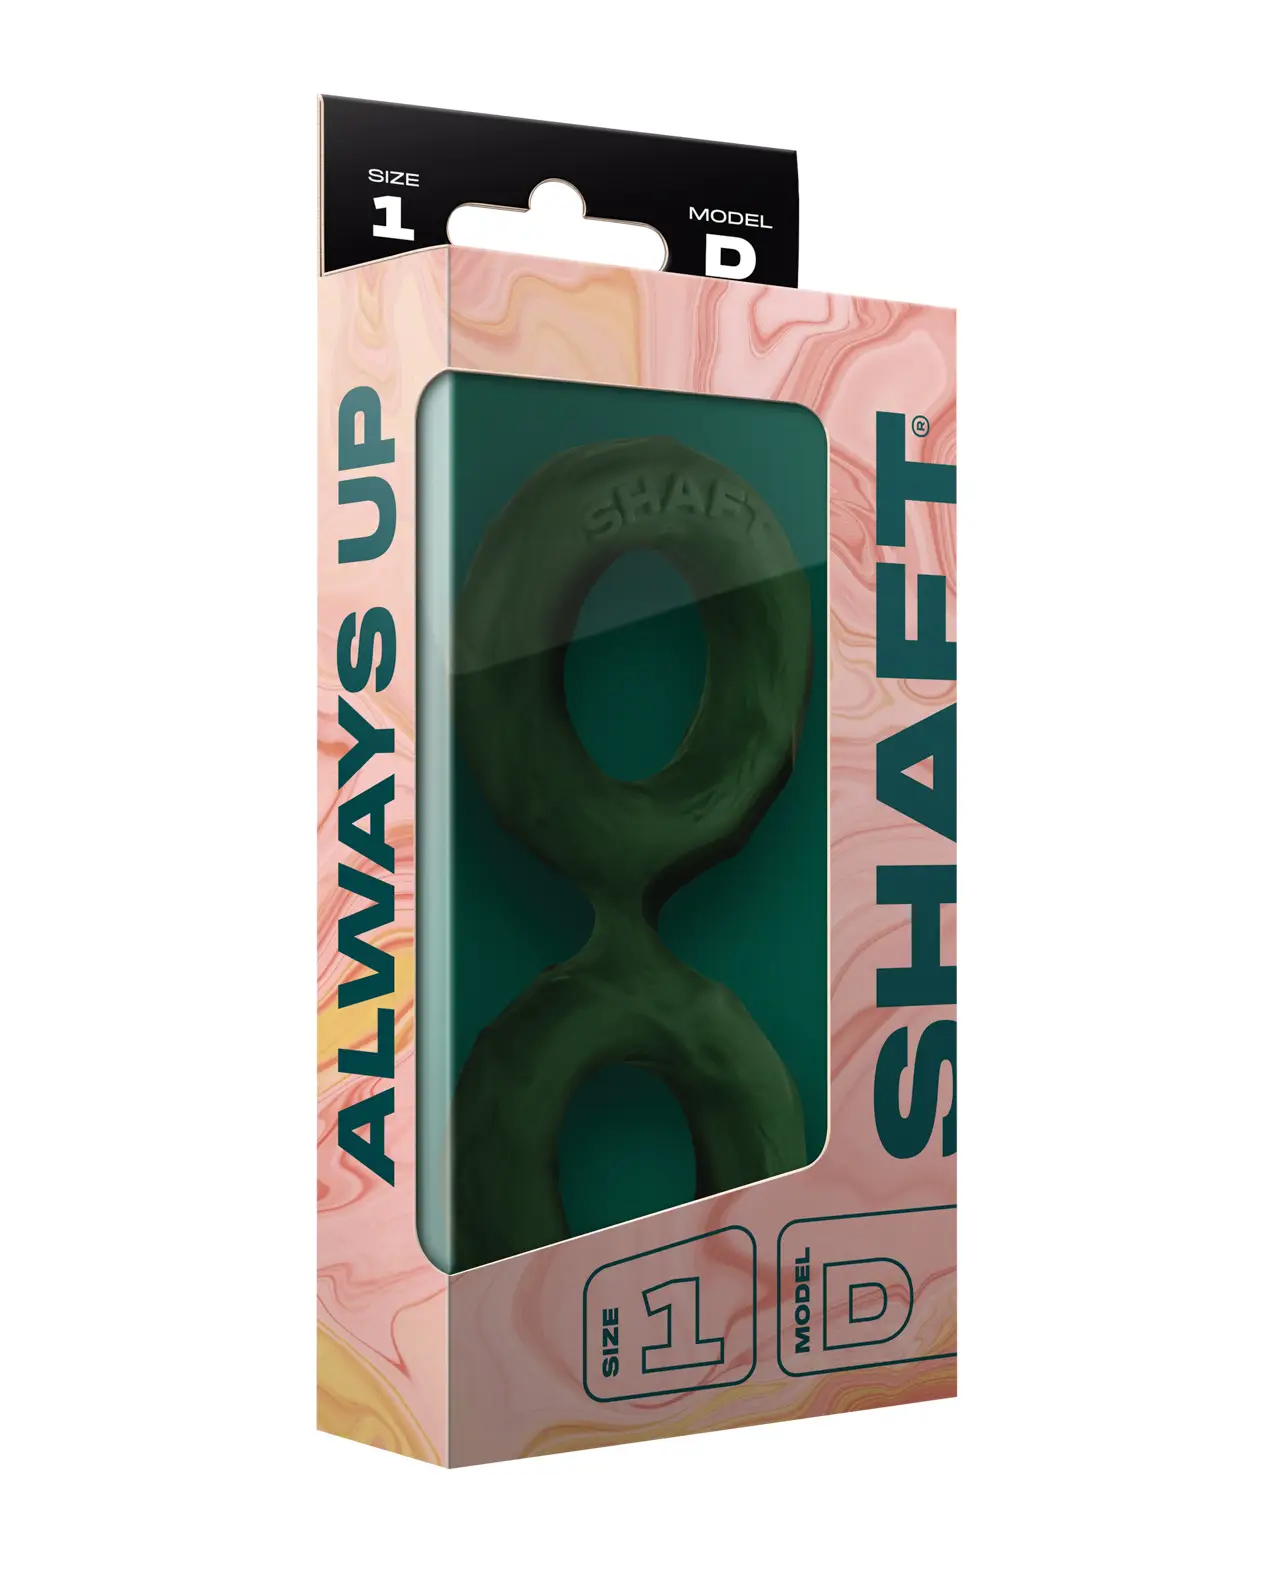 Shaft Double C-Ring - Small Green